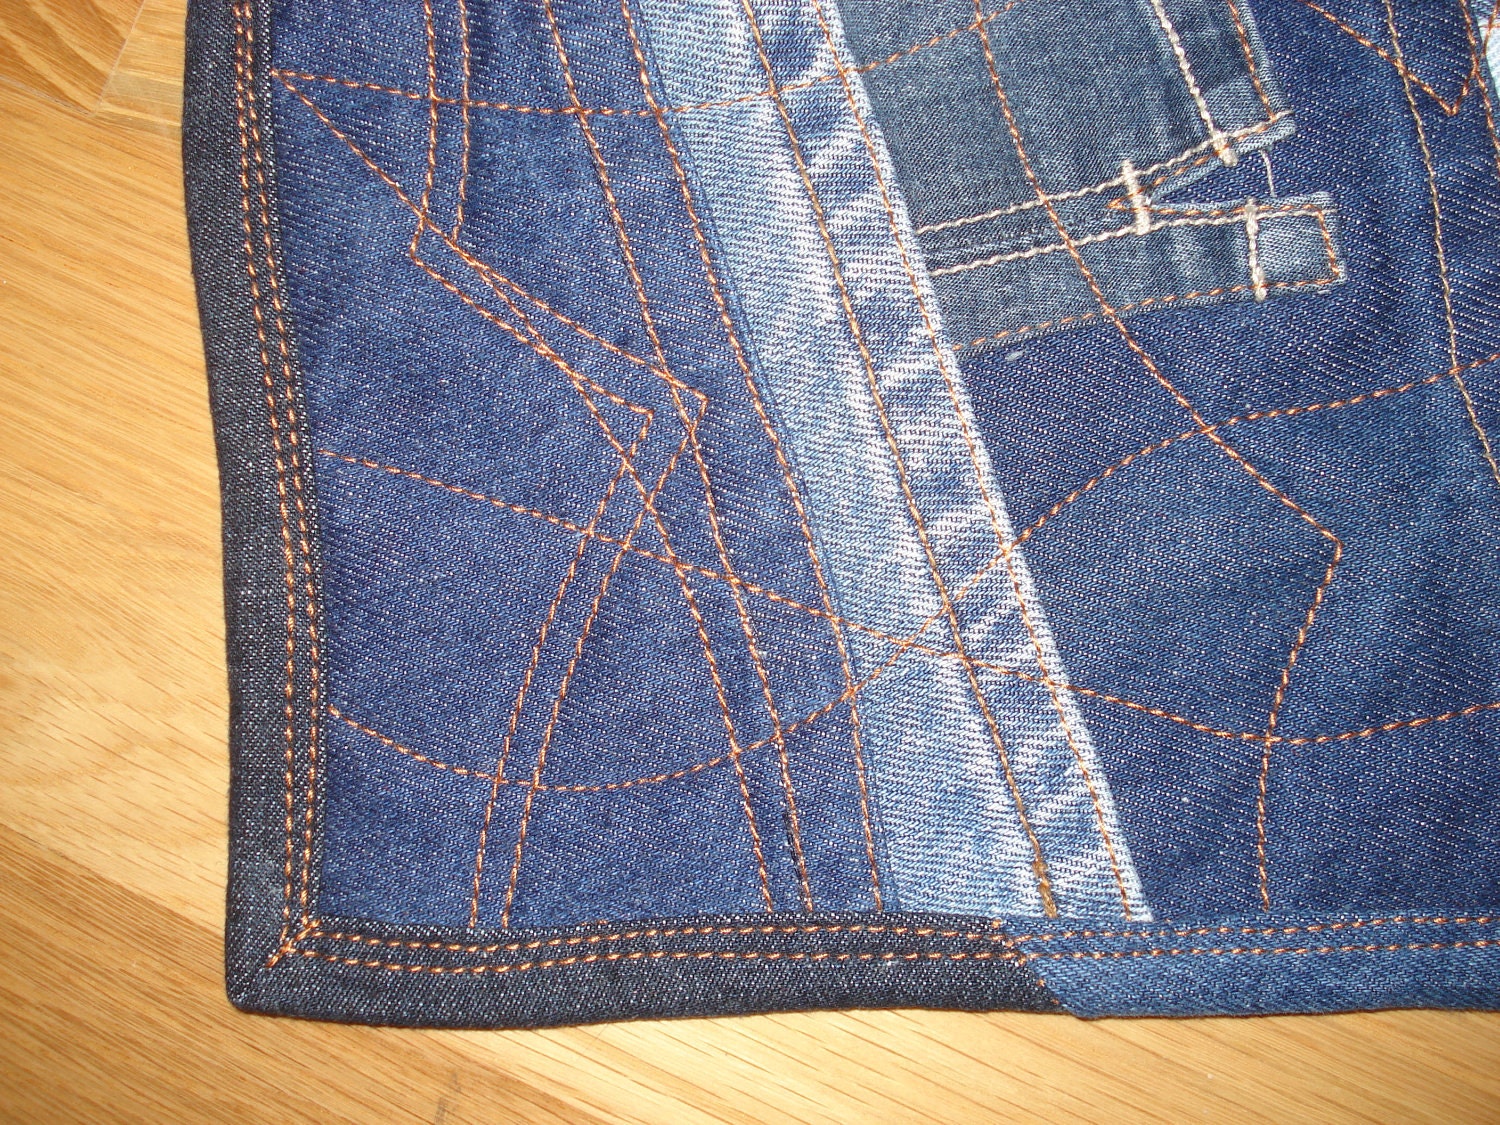 A Passionate Quilter: Wonderful Use of Recycled Denim Jeans!